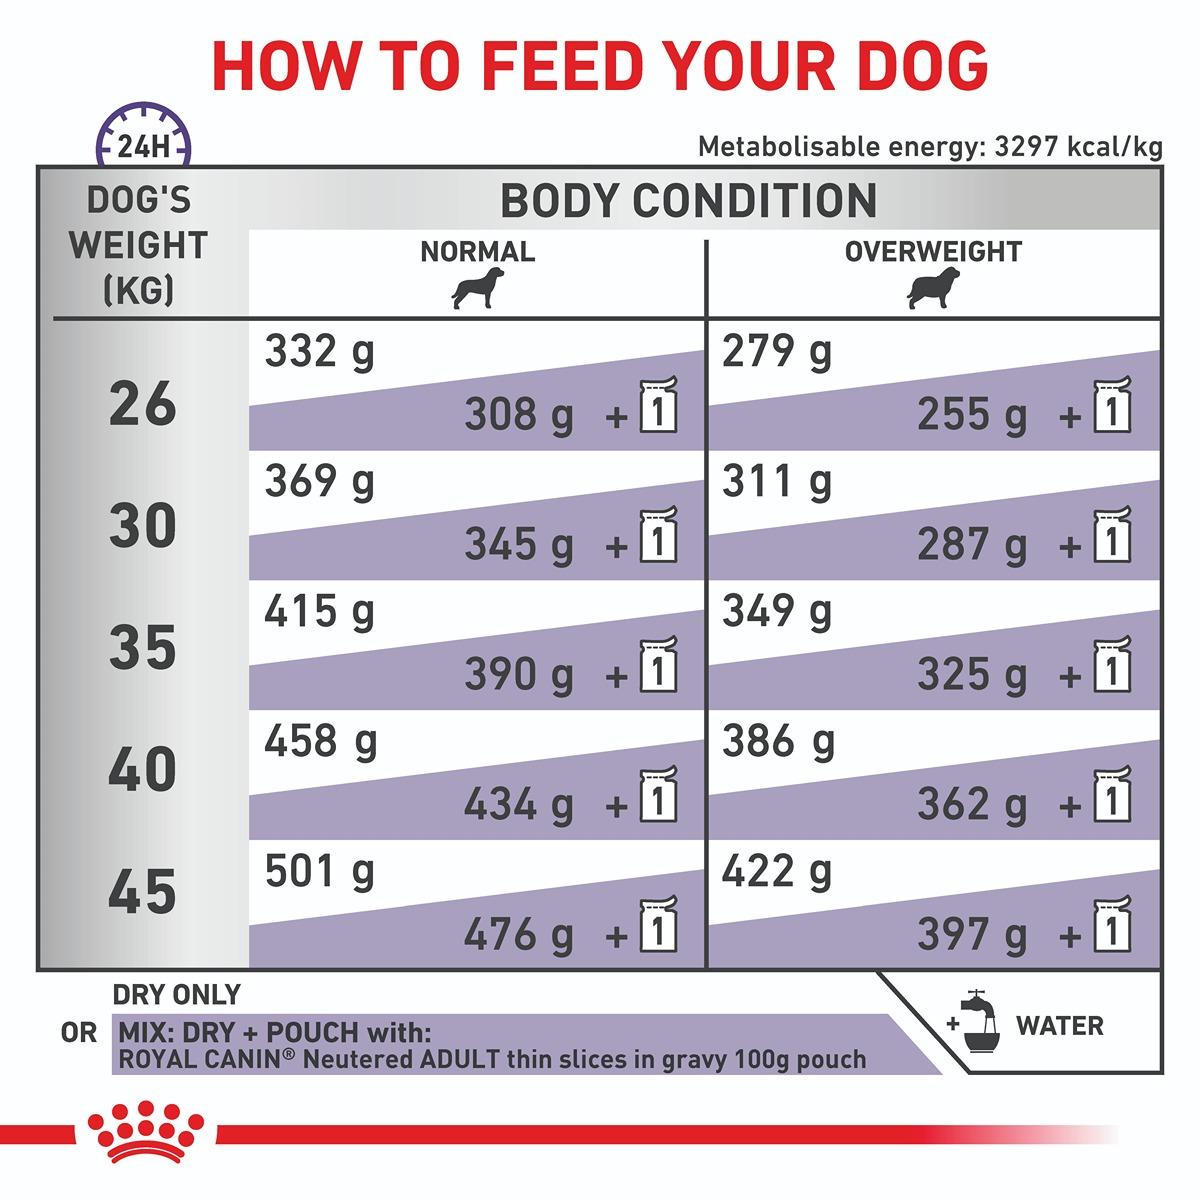 Royal Canin Veterinary Diet Neutered Adult Large Dog